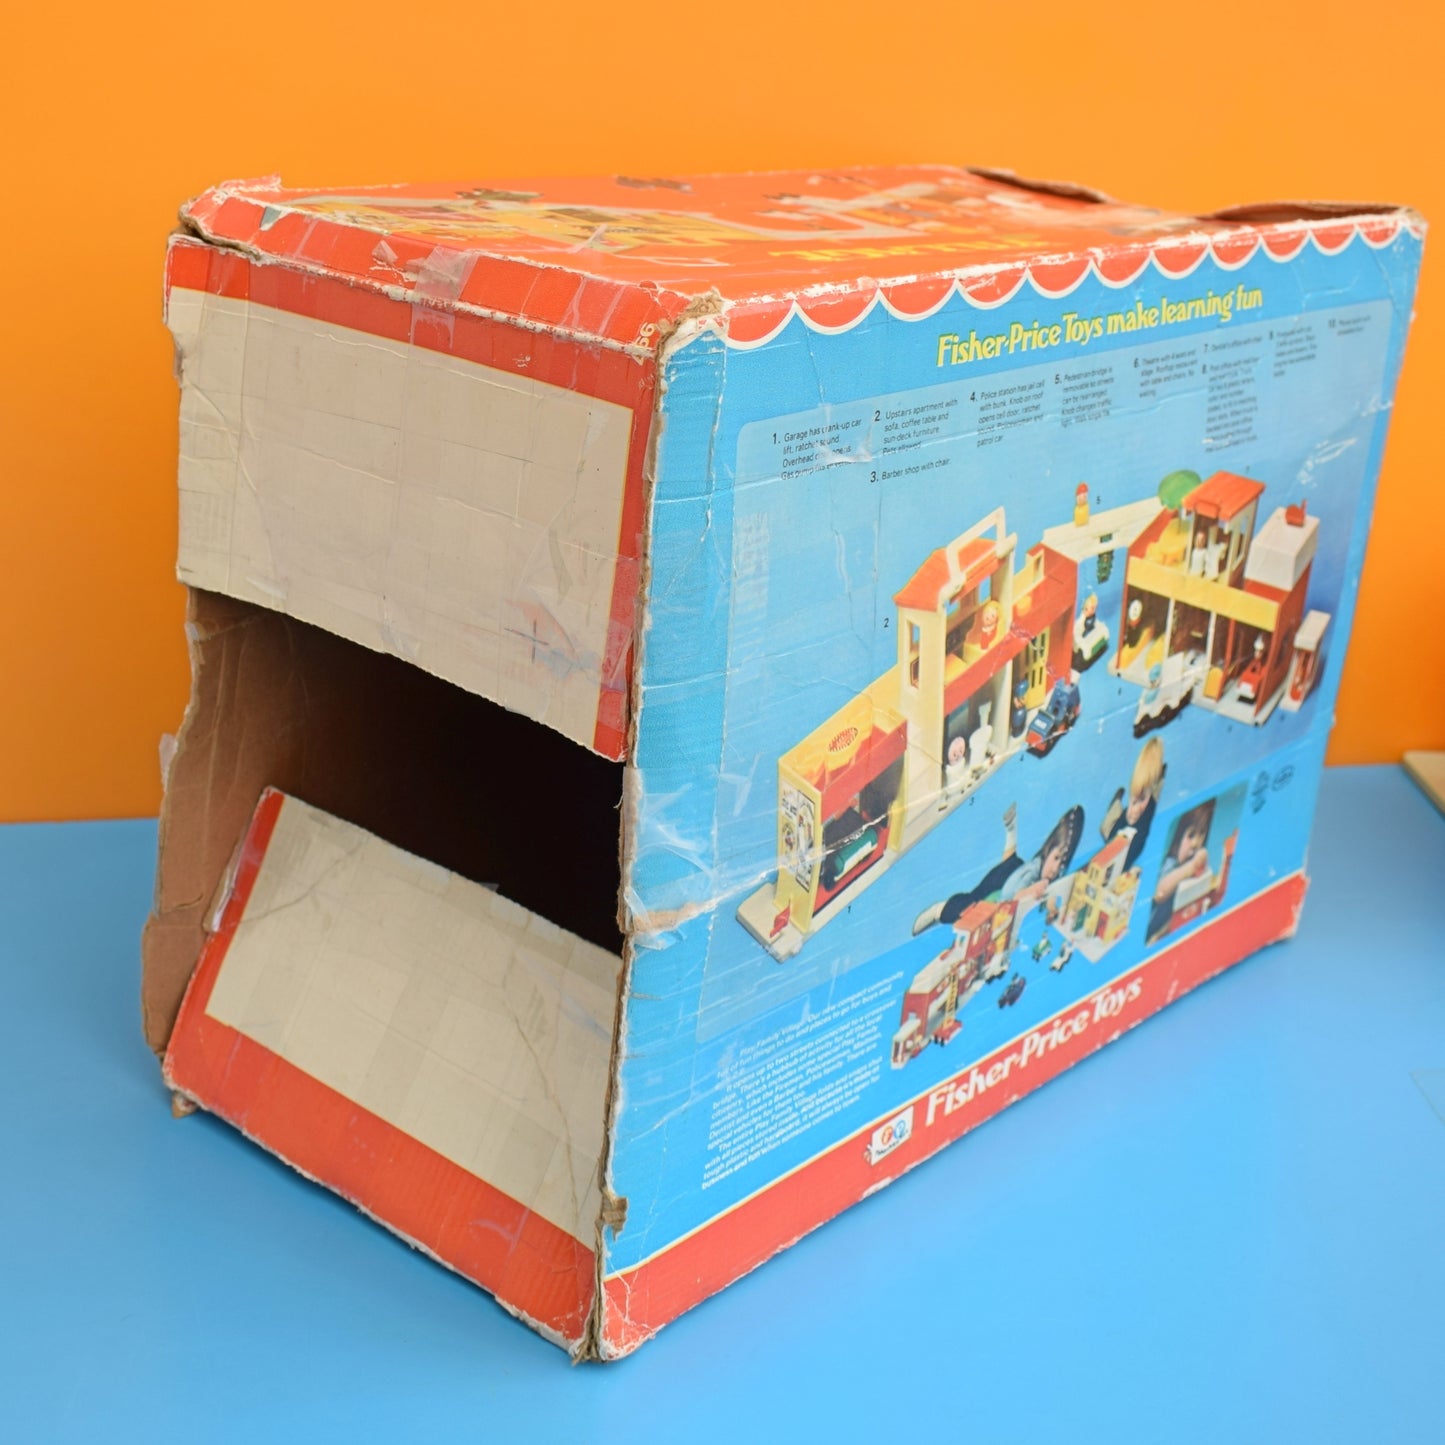 Vintage 1970s Fisher Price Village - Boxed